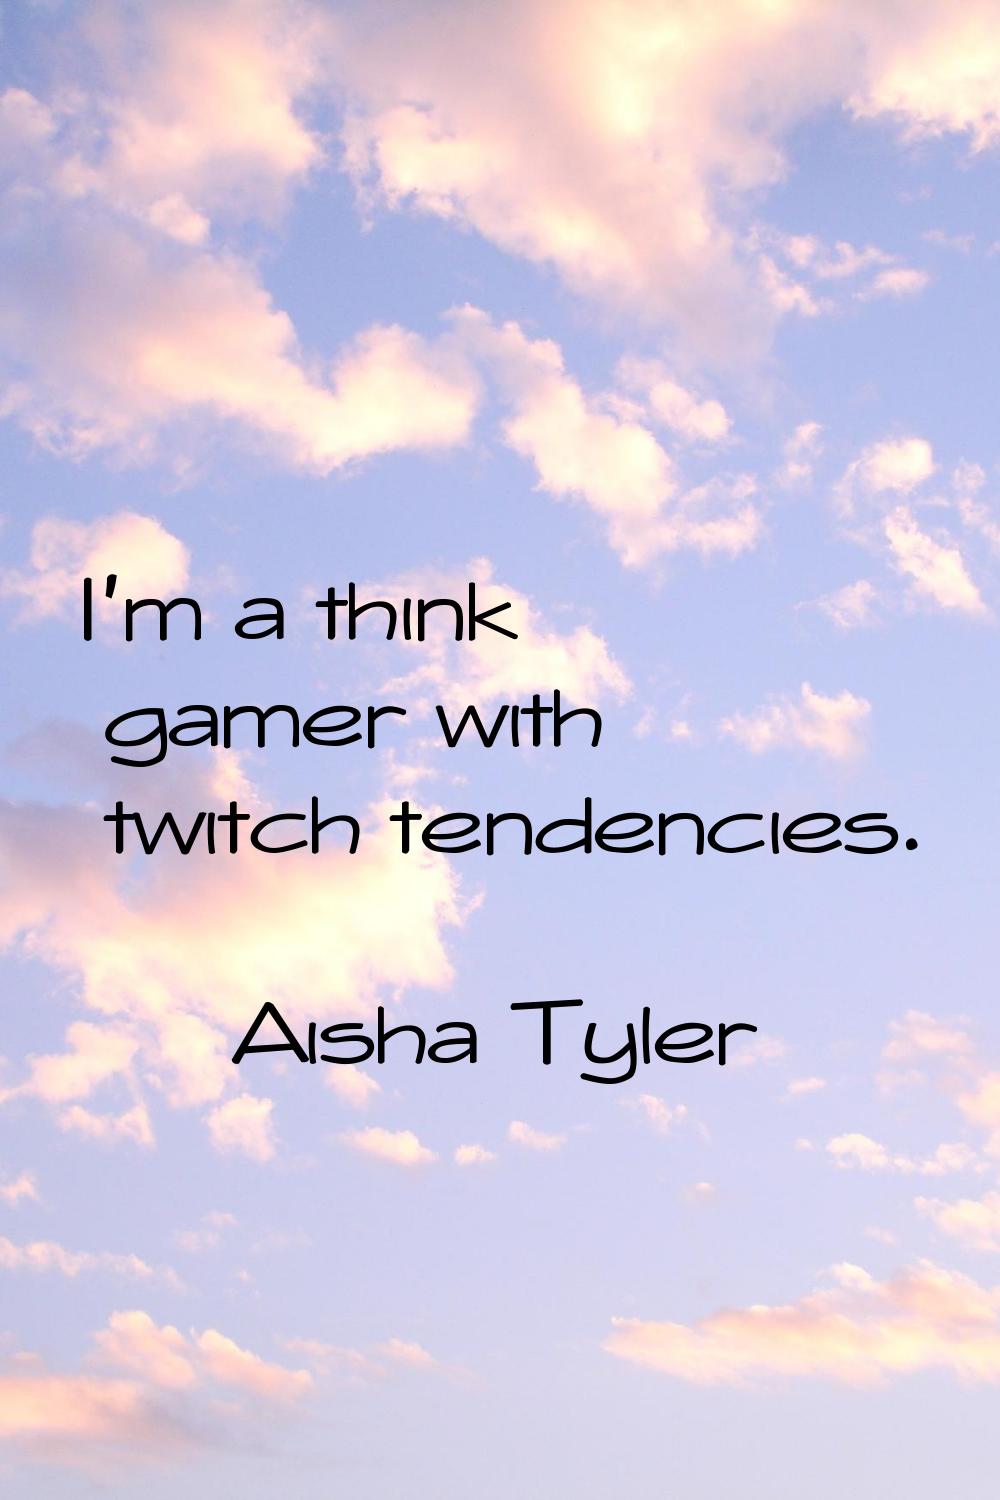 I'm a think gamer with twitch tendencies.